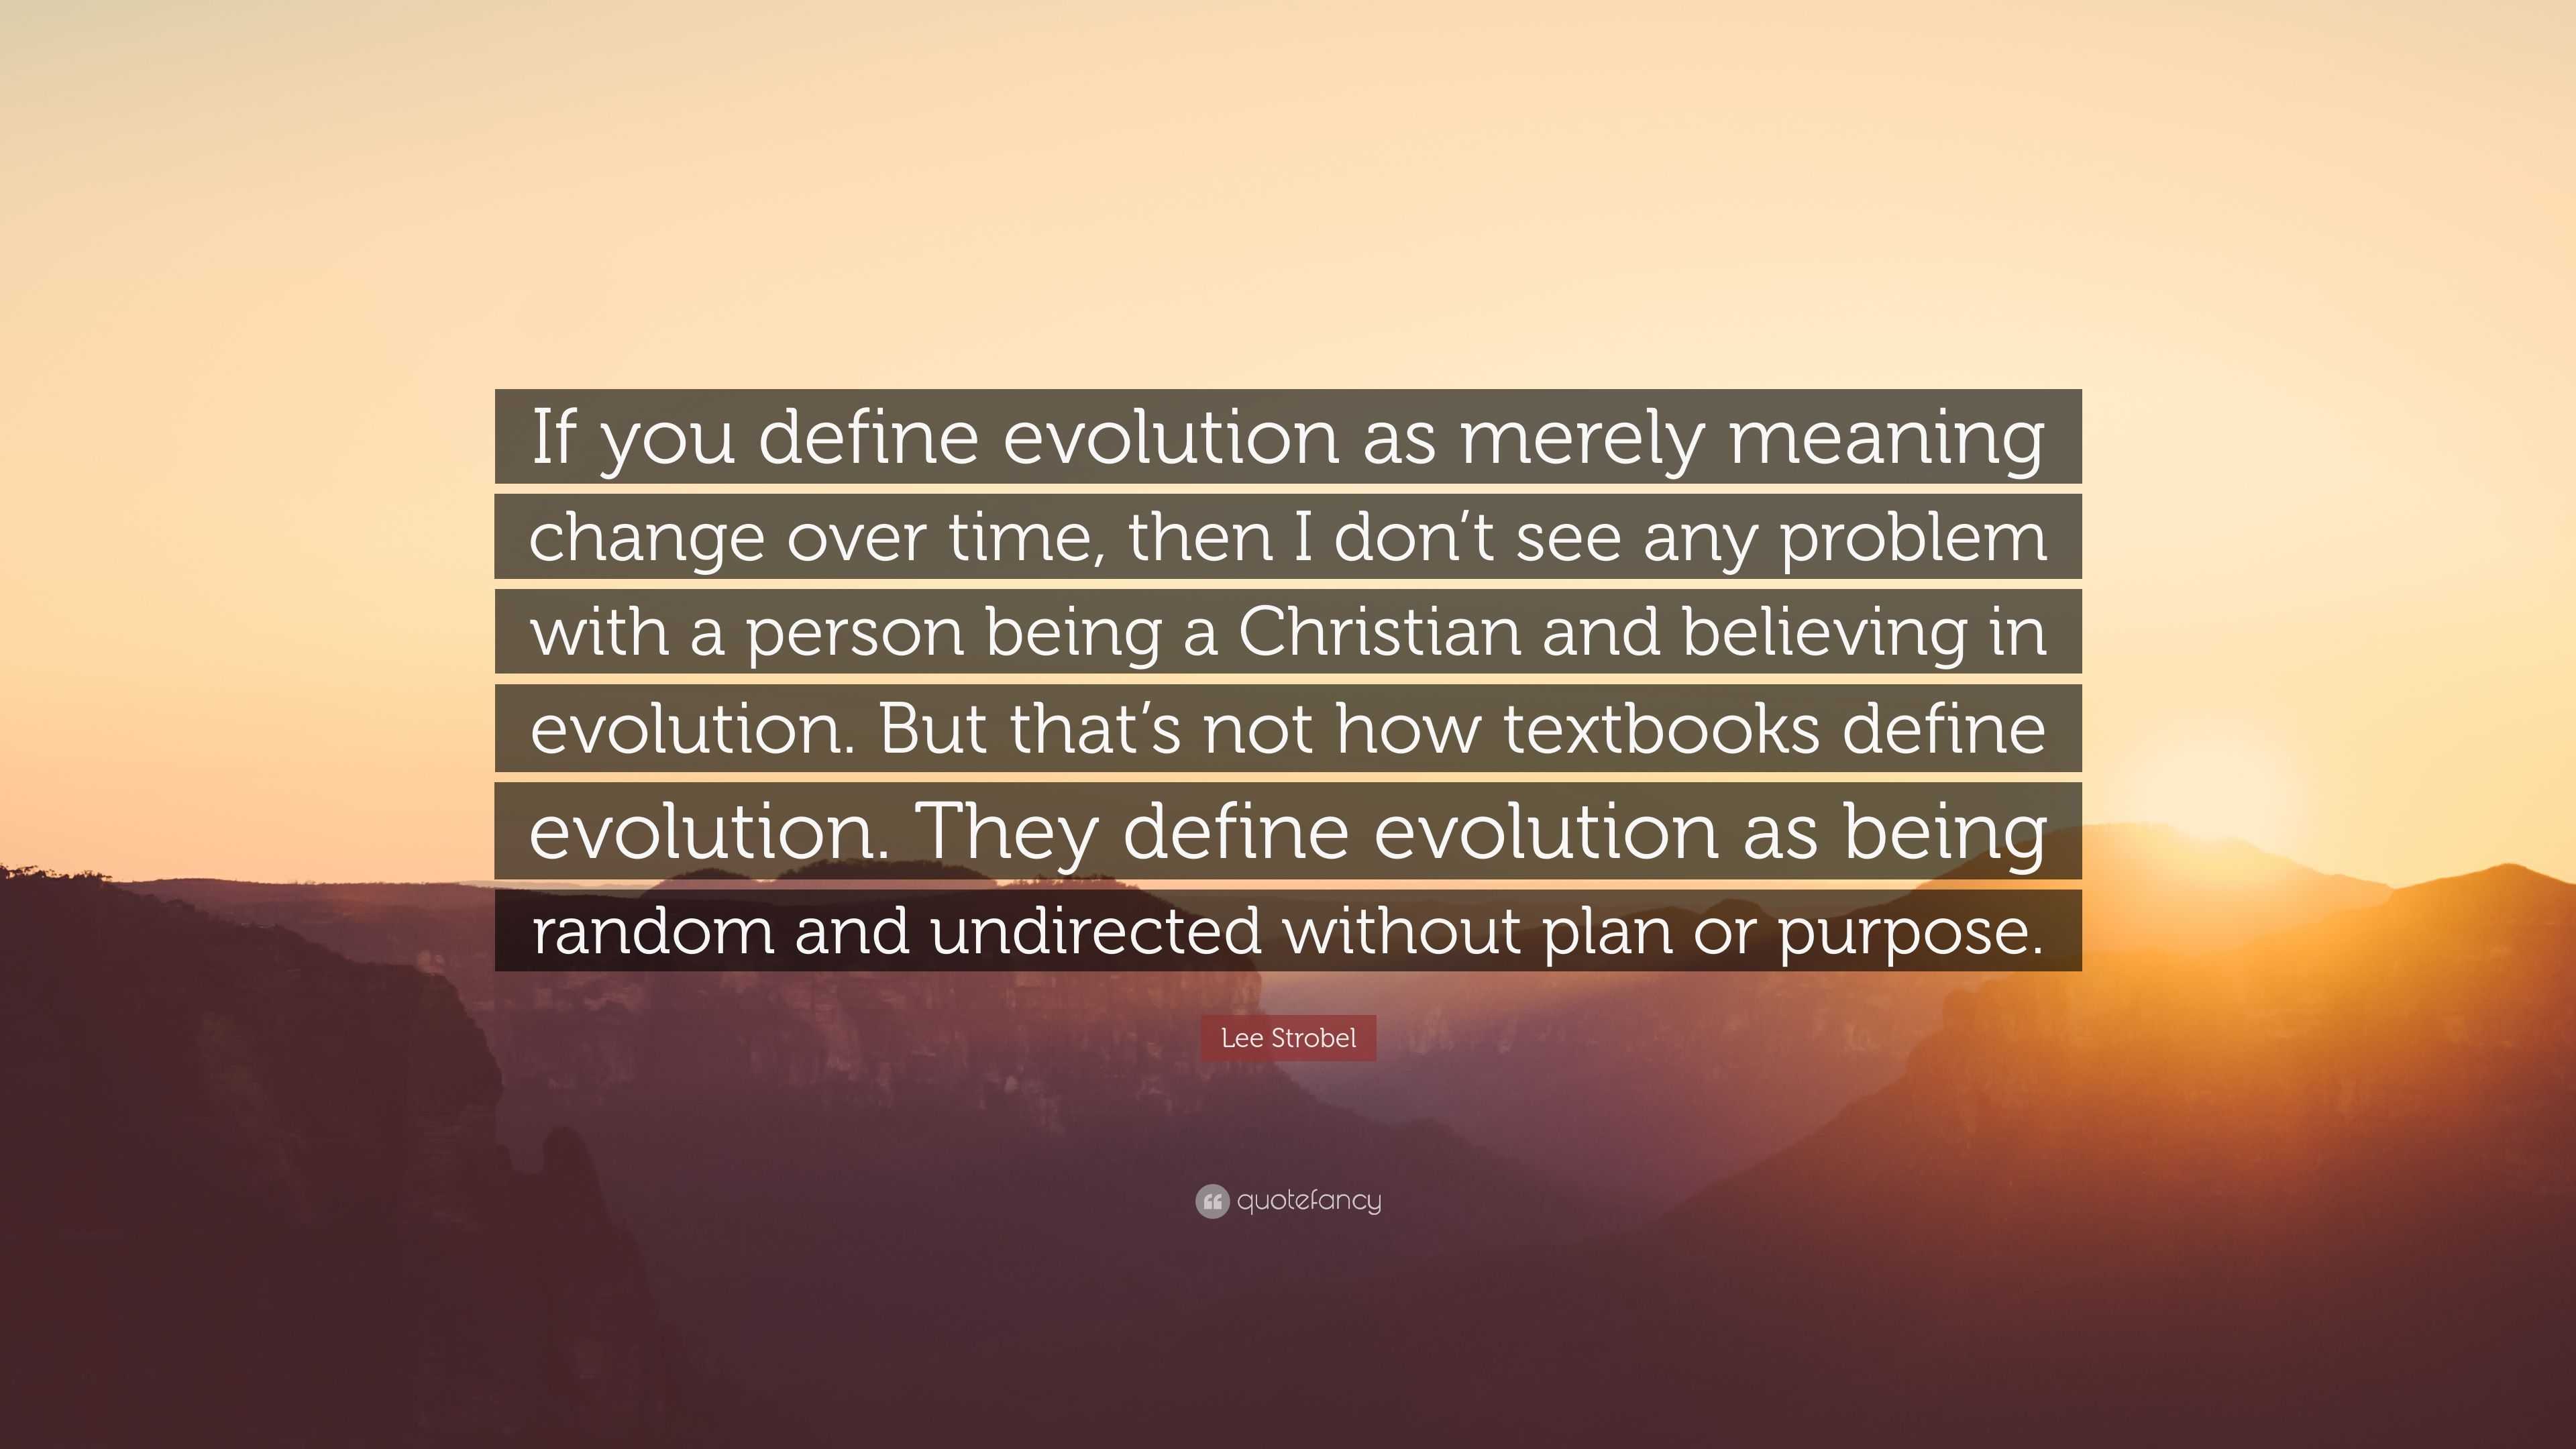 Lee Strobel Quote: “If you define evolution as merely meaning change over  time, then I don't see any problem with a person being a Christian”